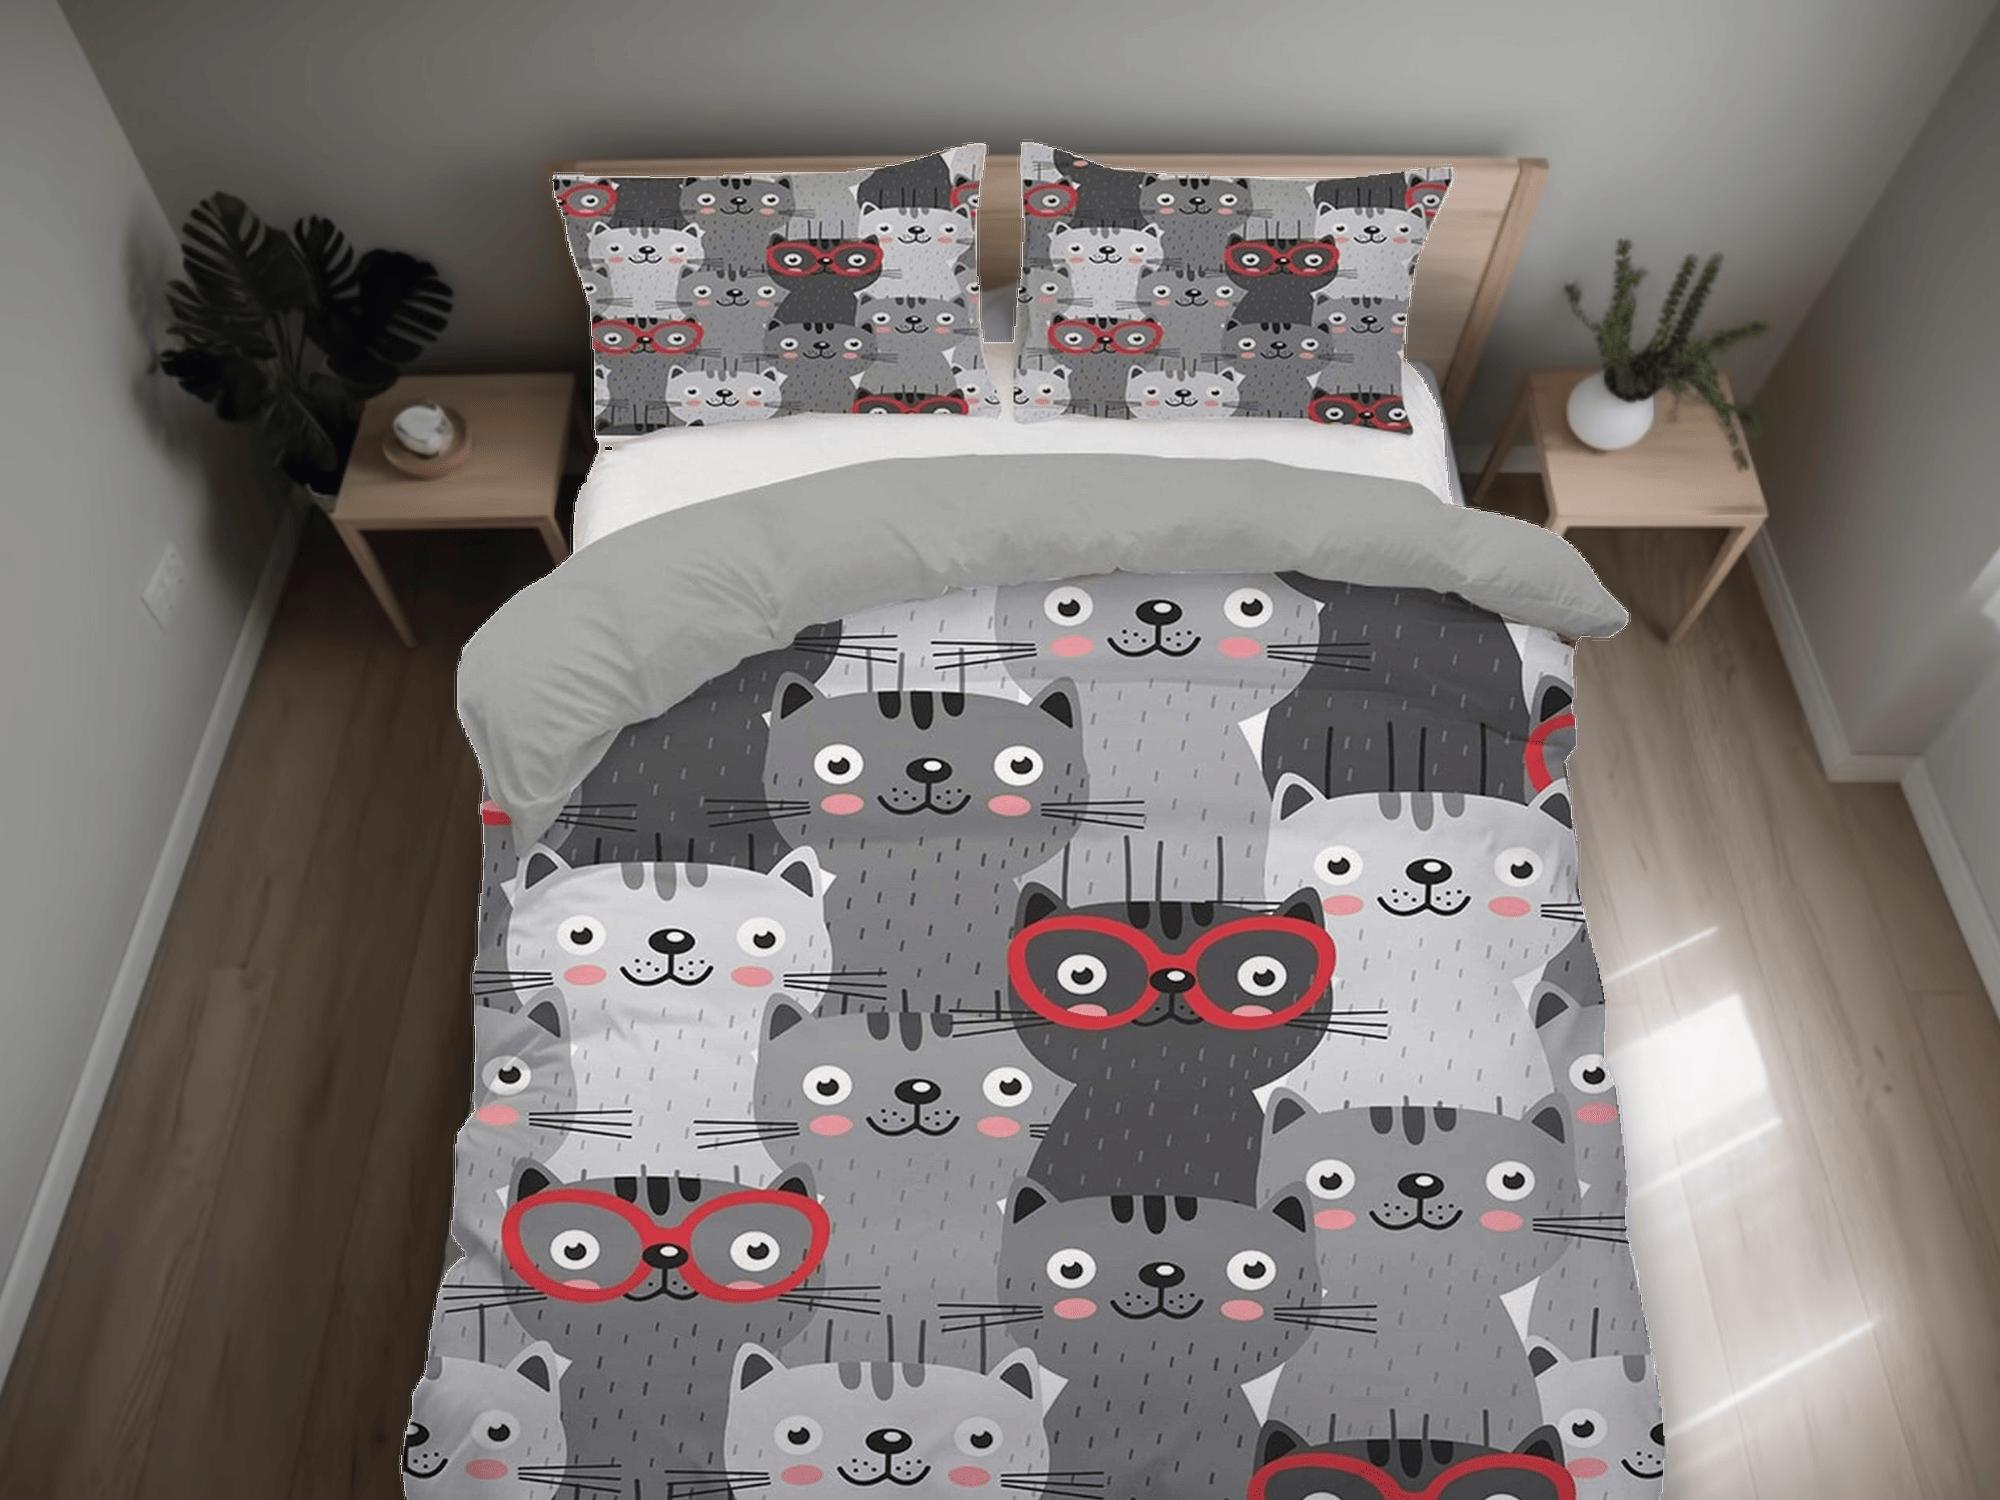 daintyduvet Cute and nerdy cats grey bedding, unisex toddler bedding, kids duvet cover set, gift for cat lovers, baby bedding, baby shower gift